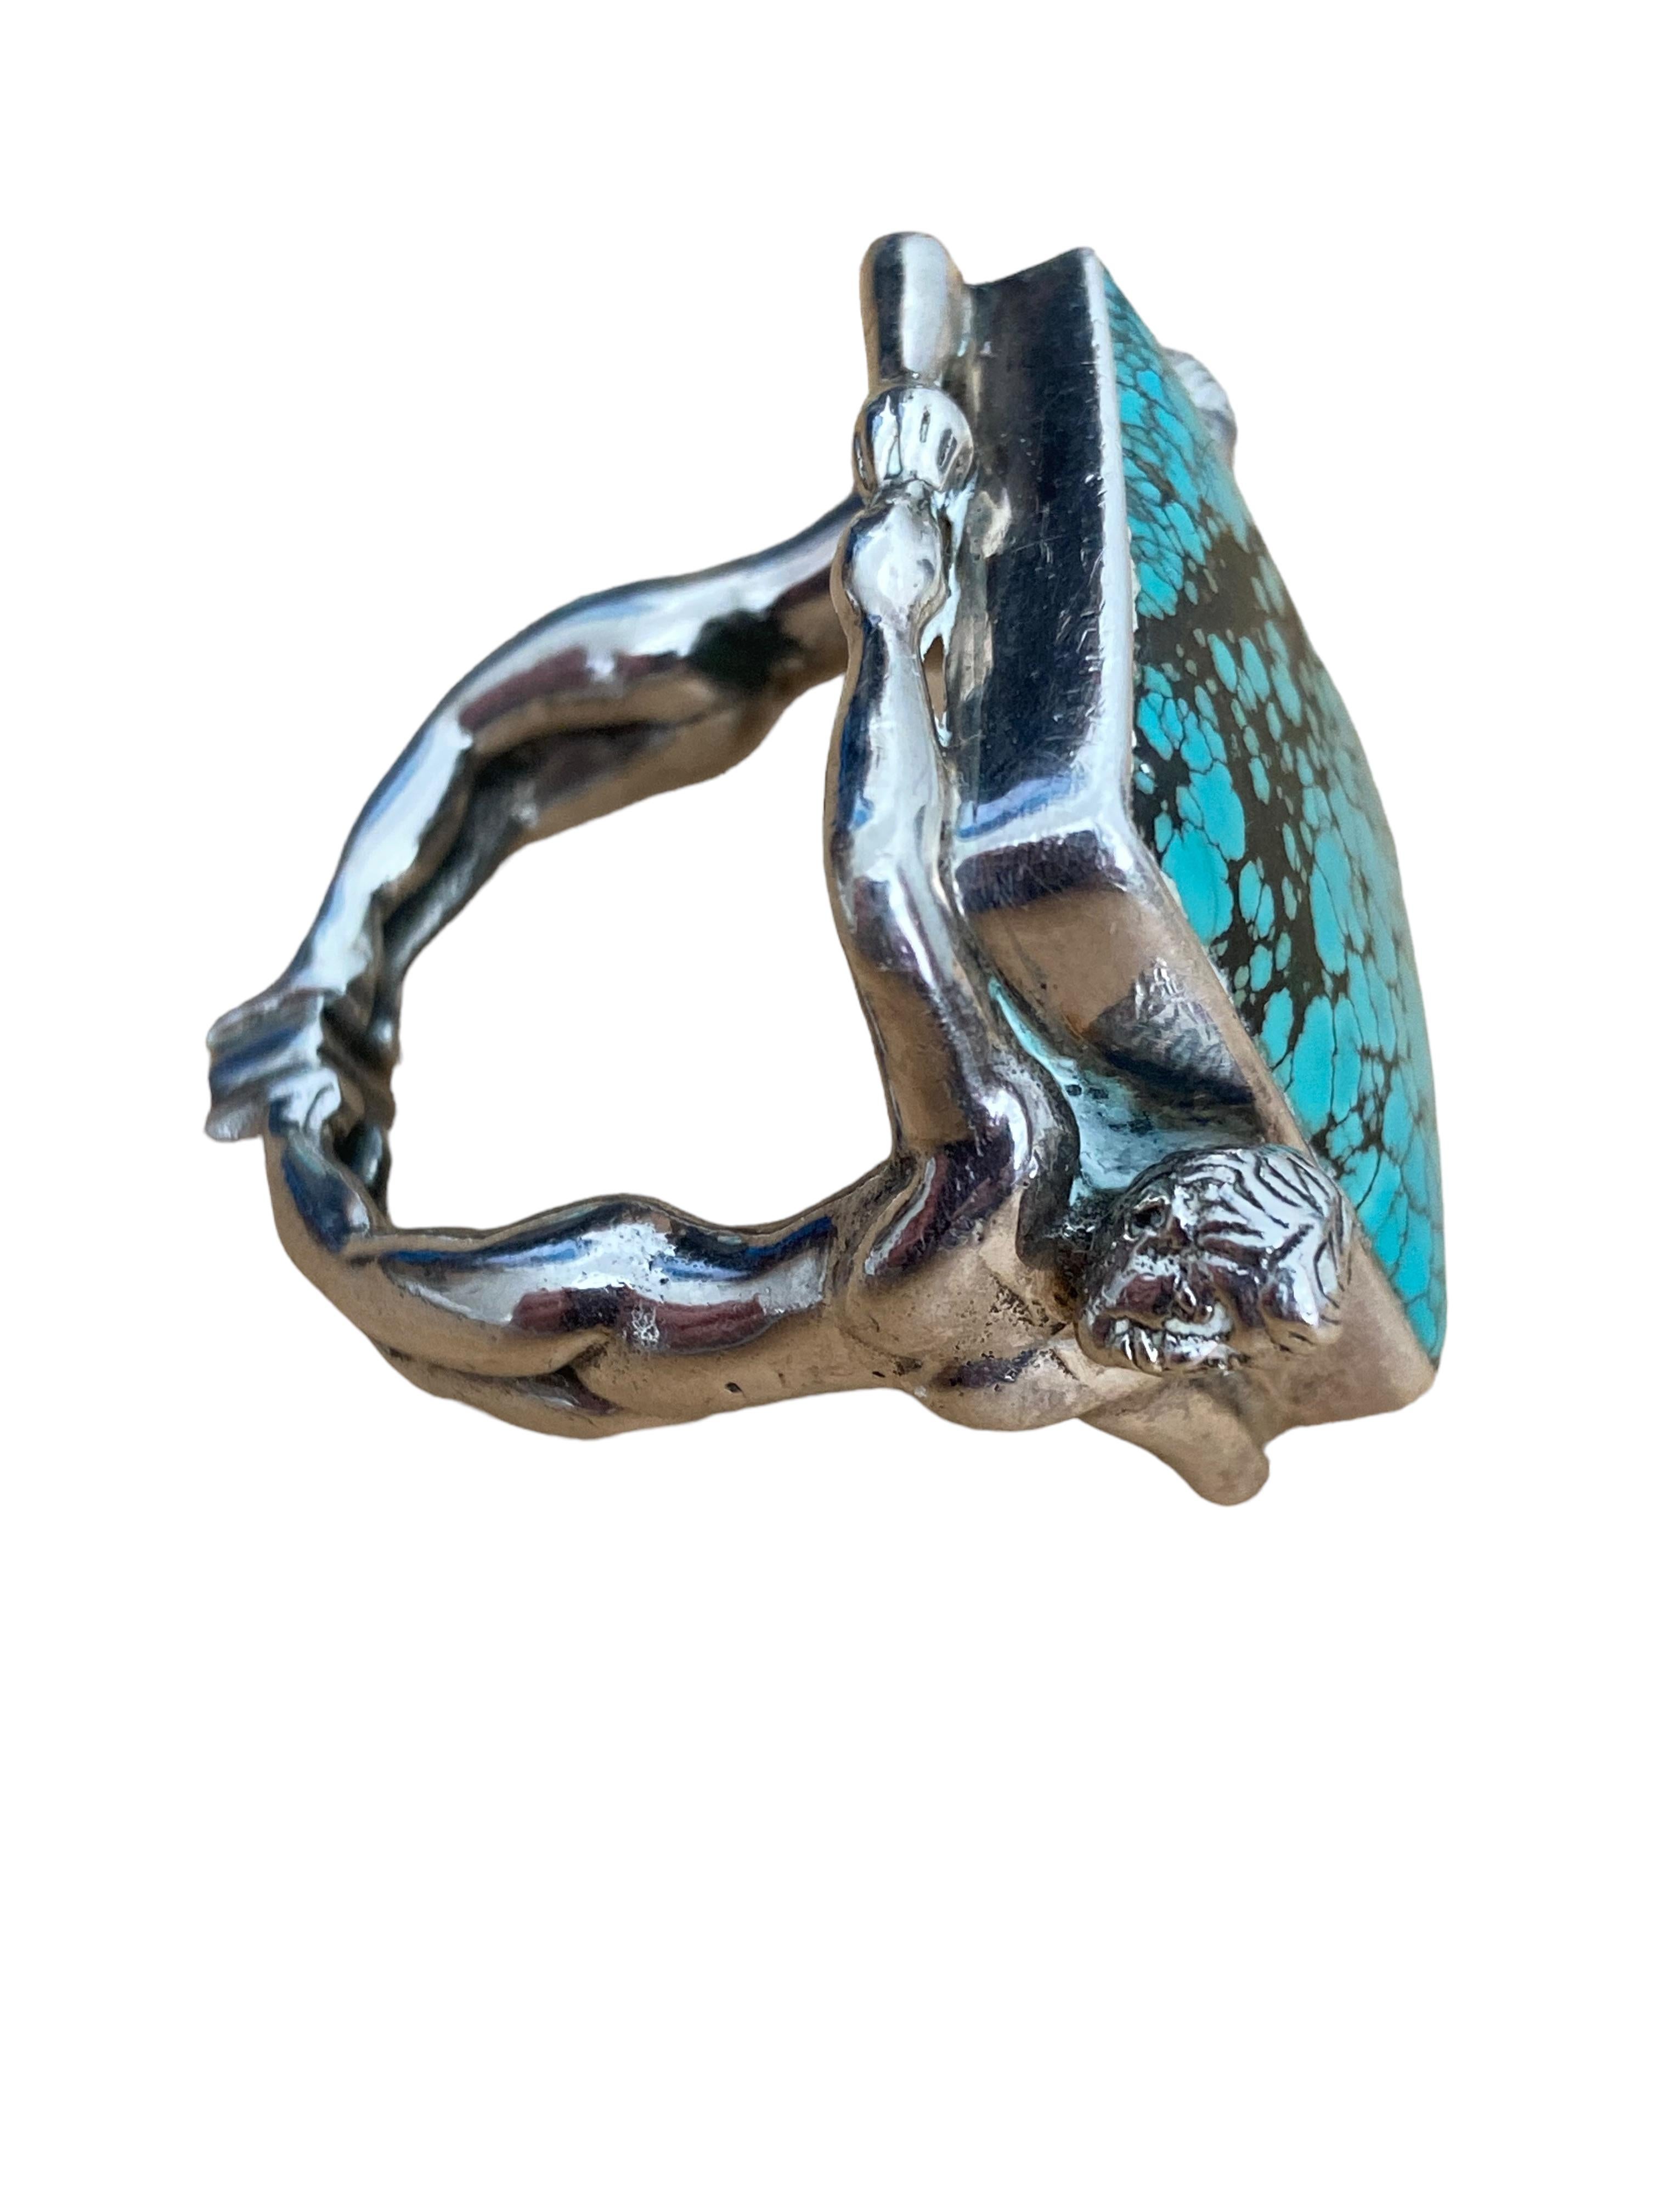 This Native American Sterling Silver and Turquoise Ring has a maker's mark and appears to be dated 1958. One side of the shank is a man and the other is a woman. They have joined hands on either side of the ring and complete the shank with touching